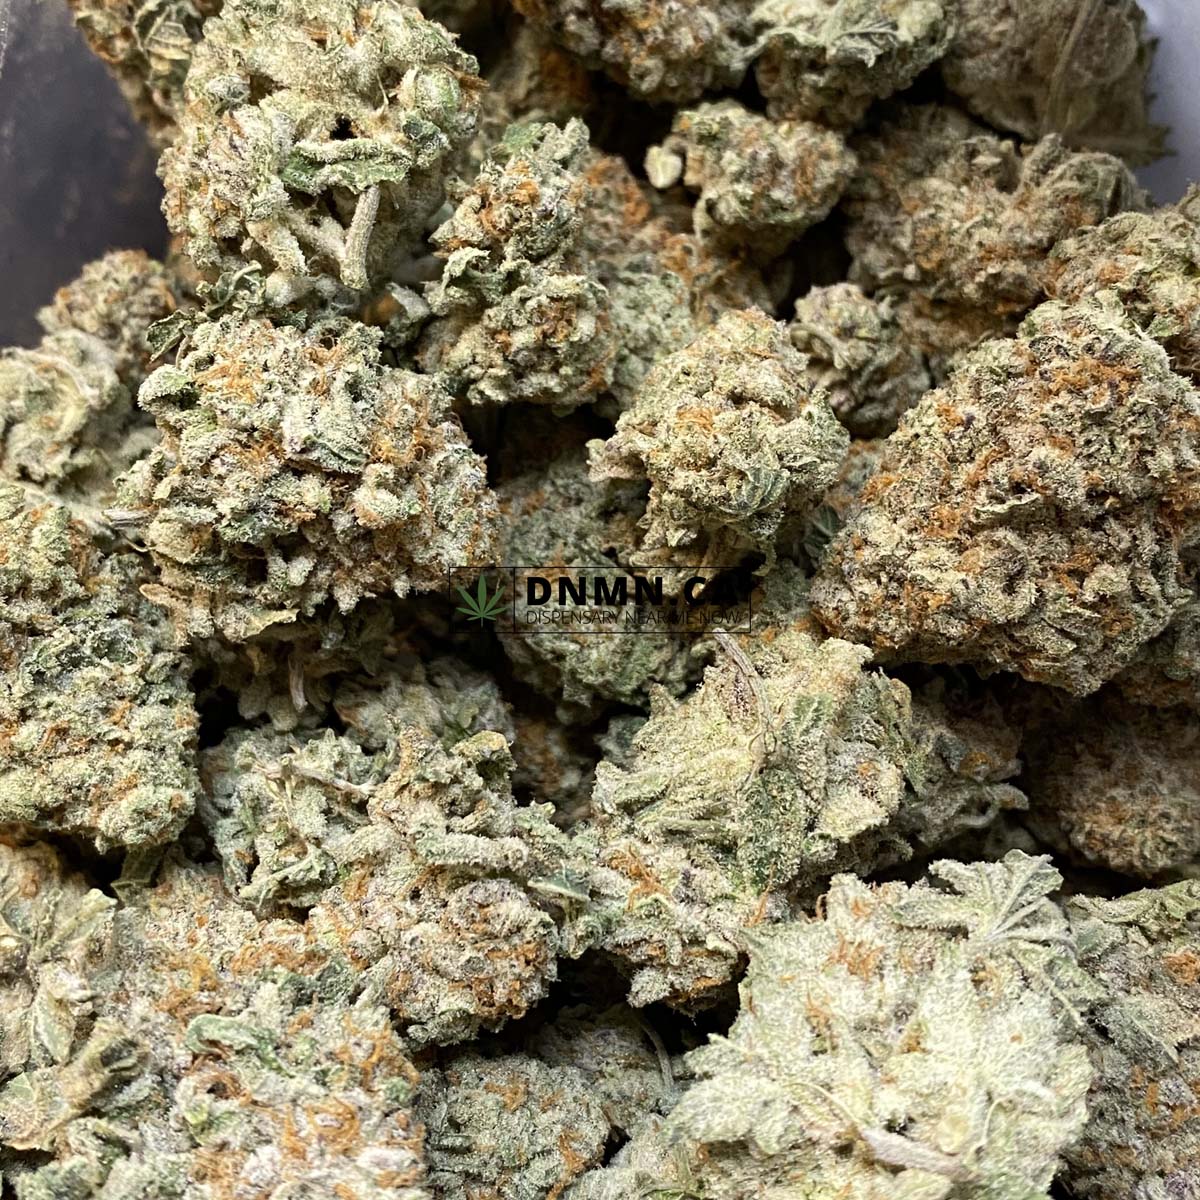 Super Sour Kush - Budget Buds in Canada - Dispensary Near Me